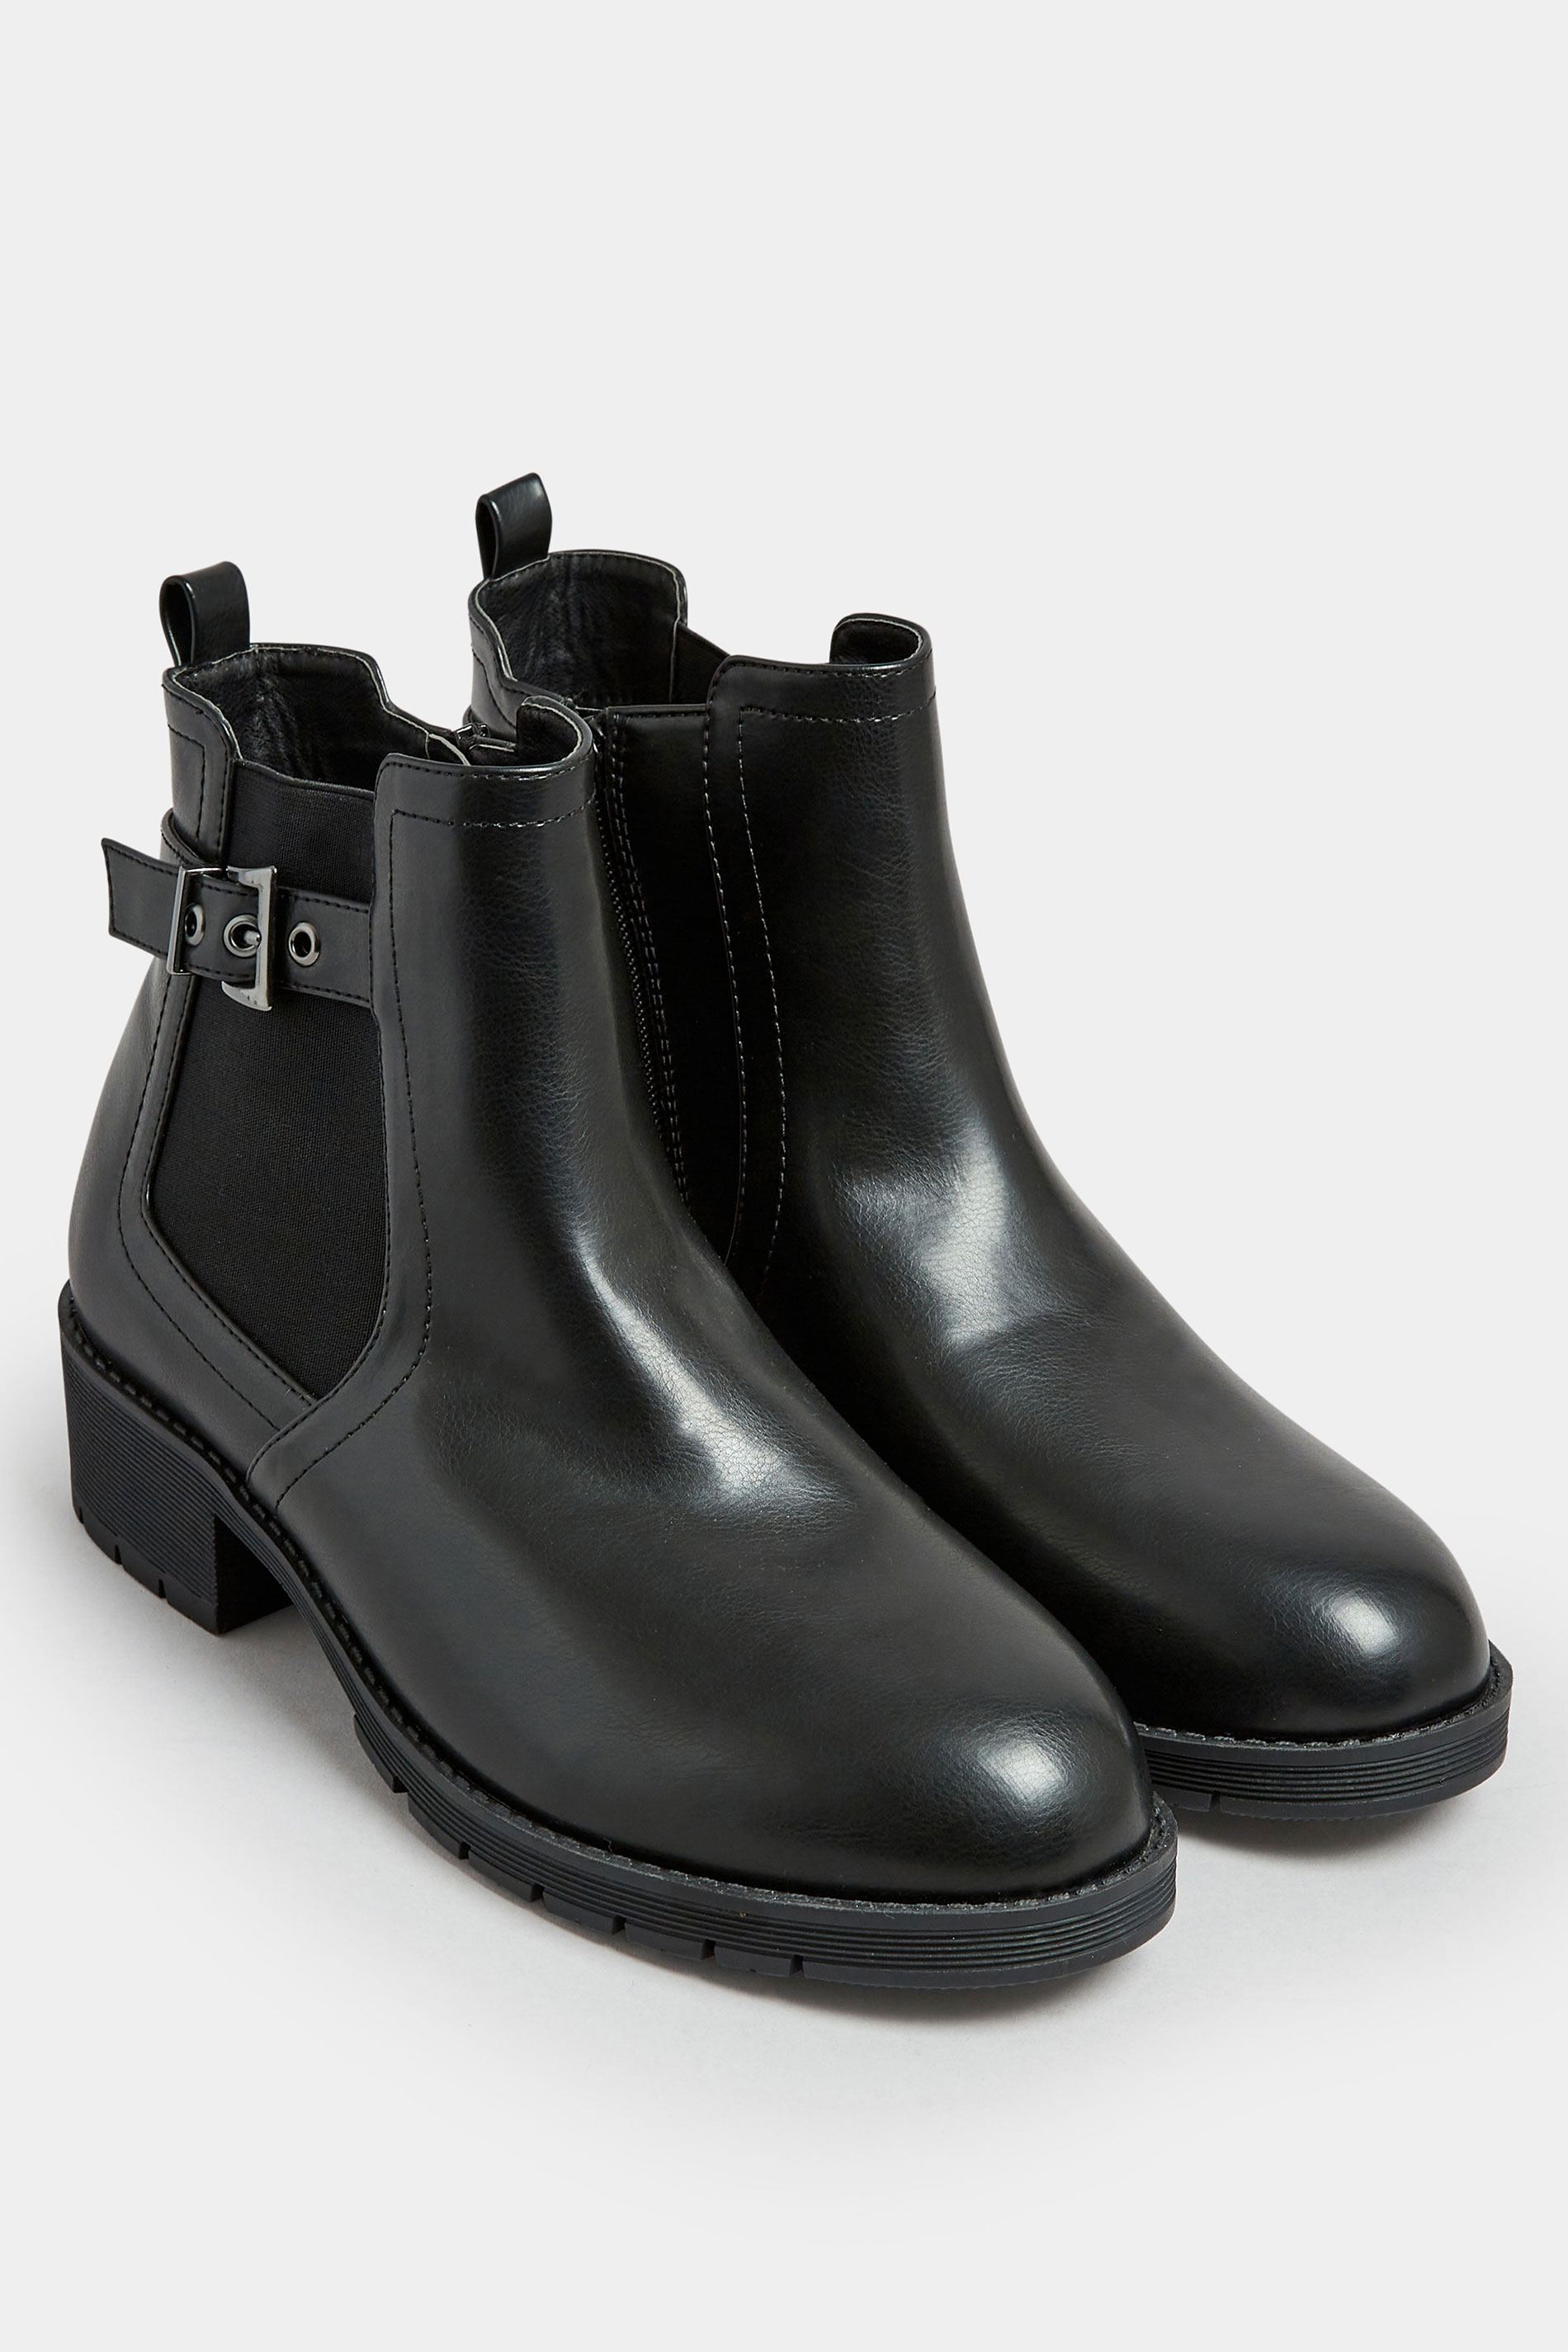 Black Faux Leather Buckle Ankle Boots In Wide E Fit & Extra Wide EEE Fit | Yours Clothing 2